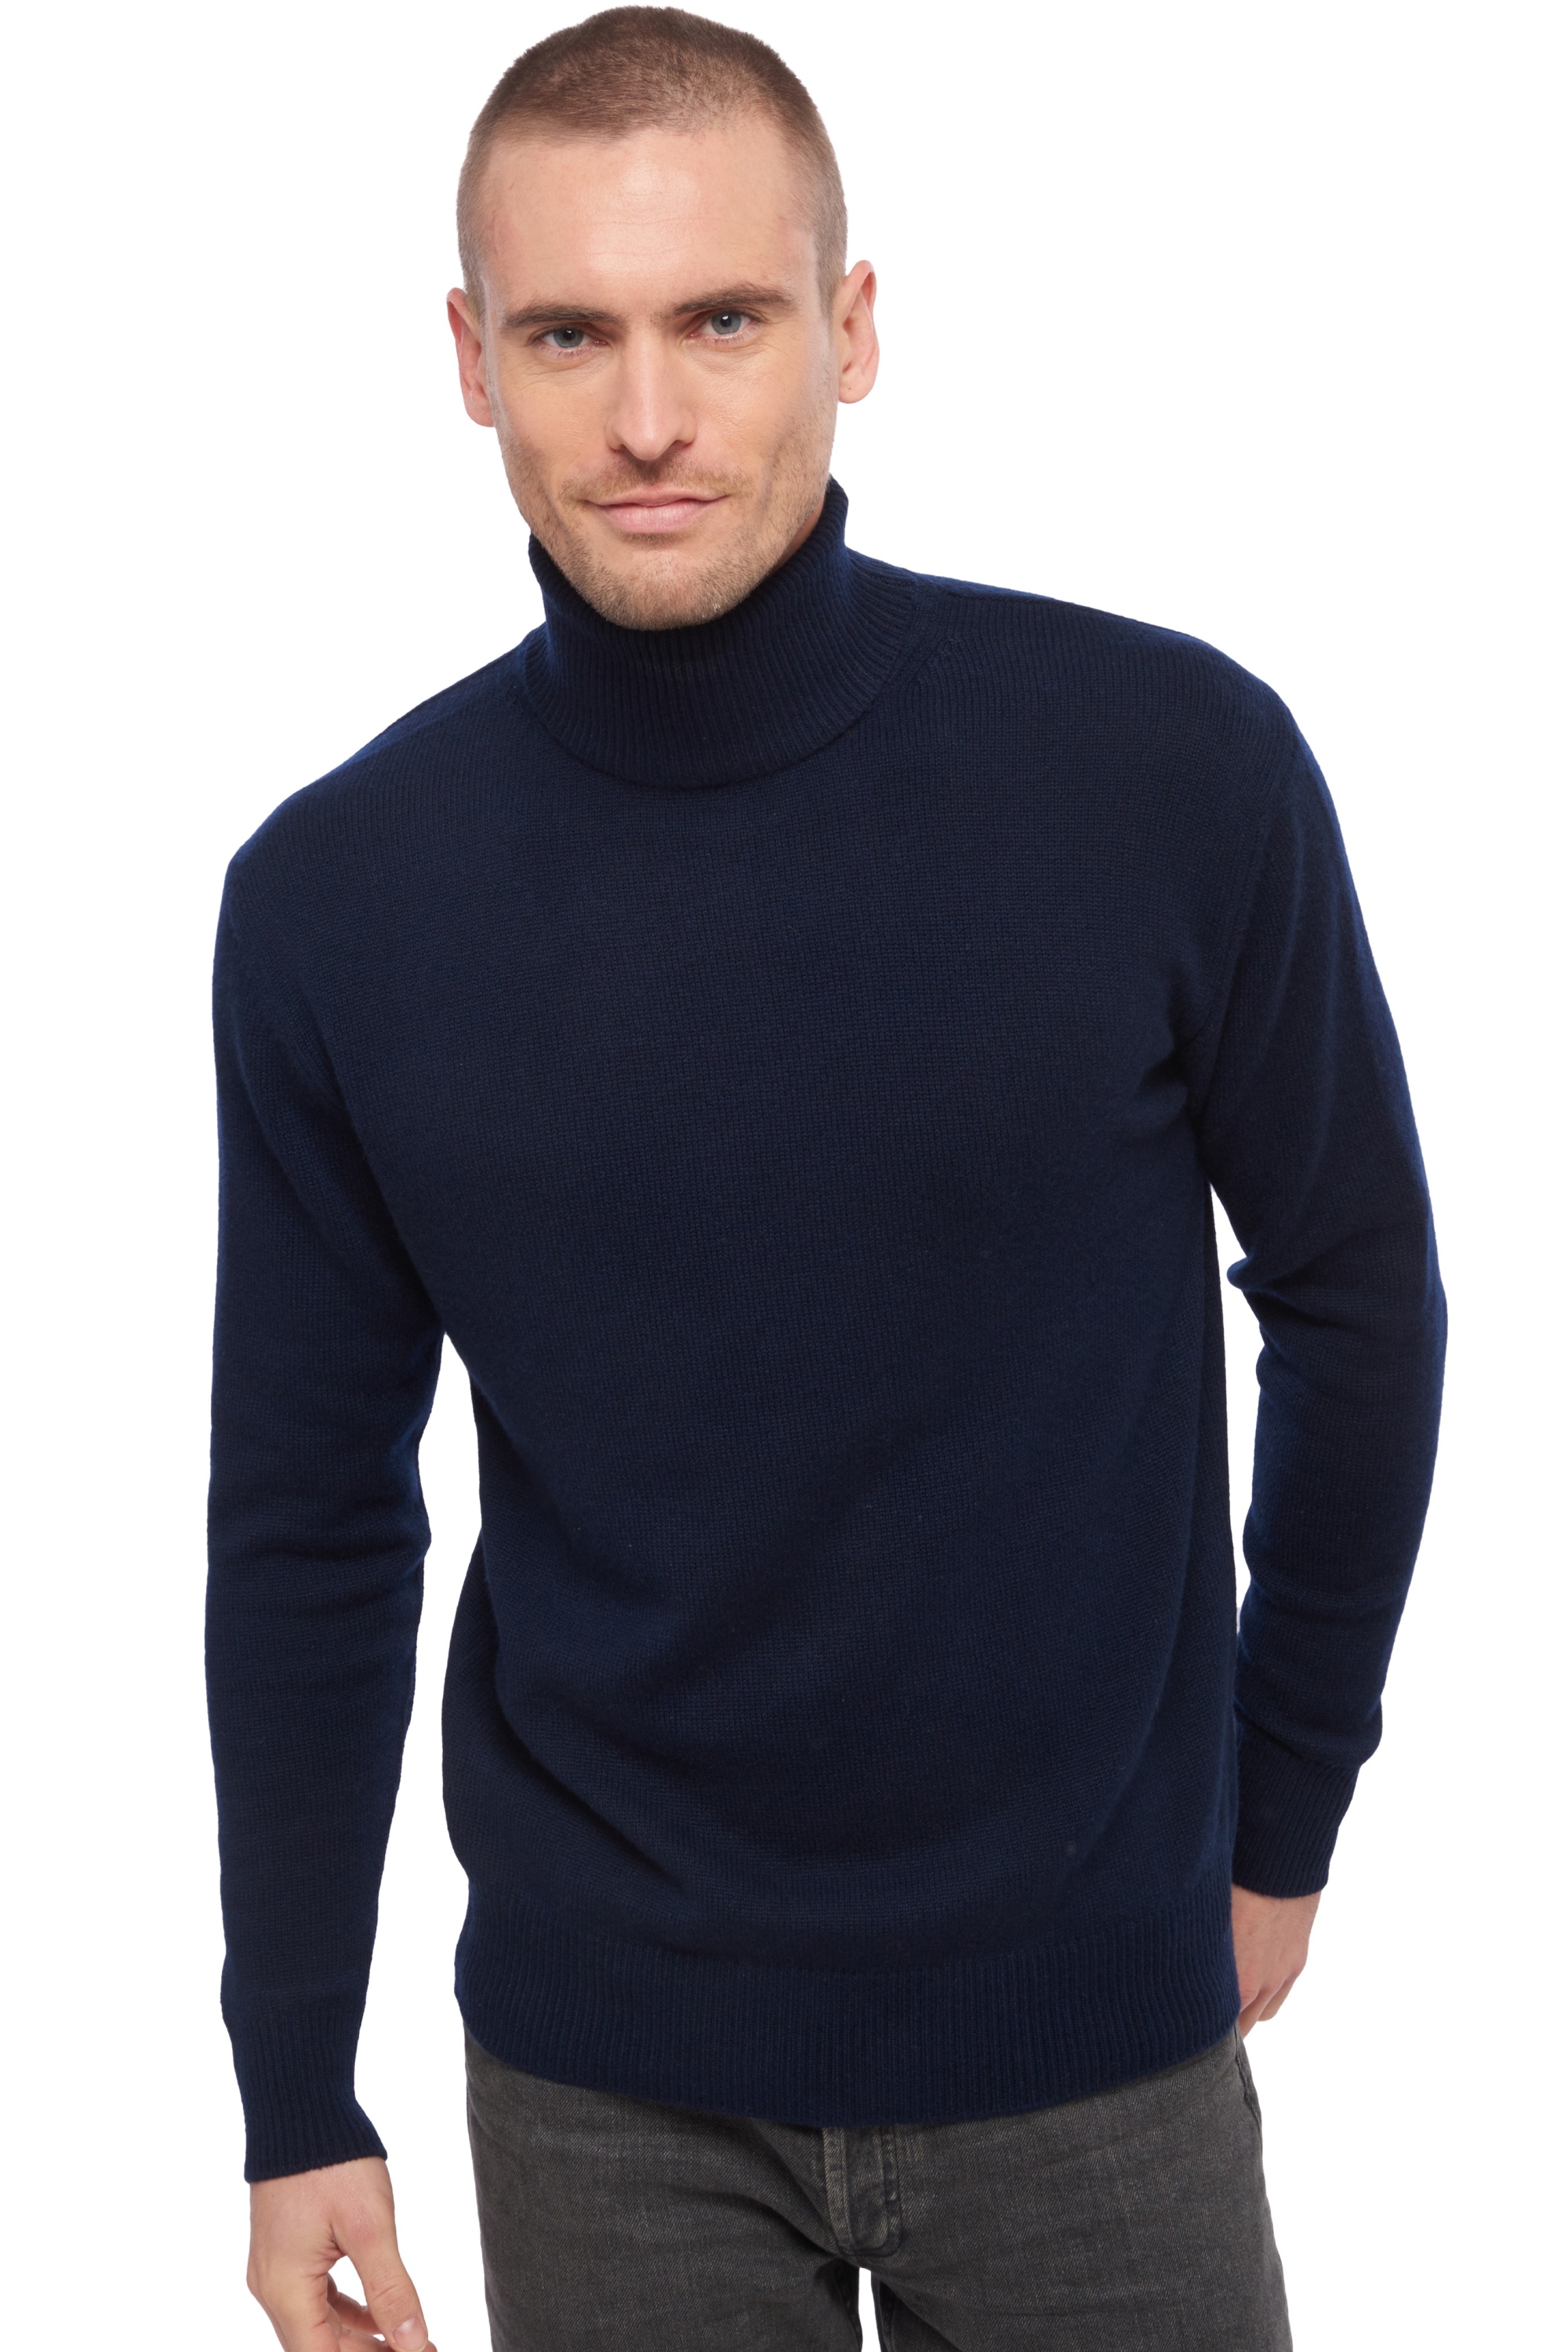 Cachemire pull homme col roule edgar 4f marine fonce m